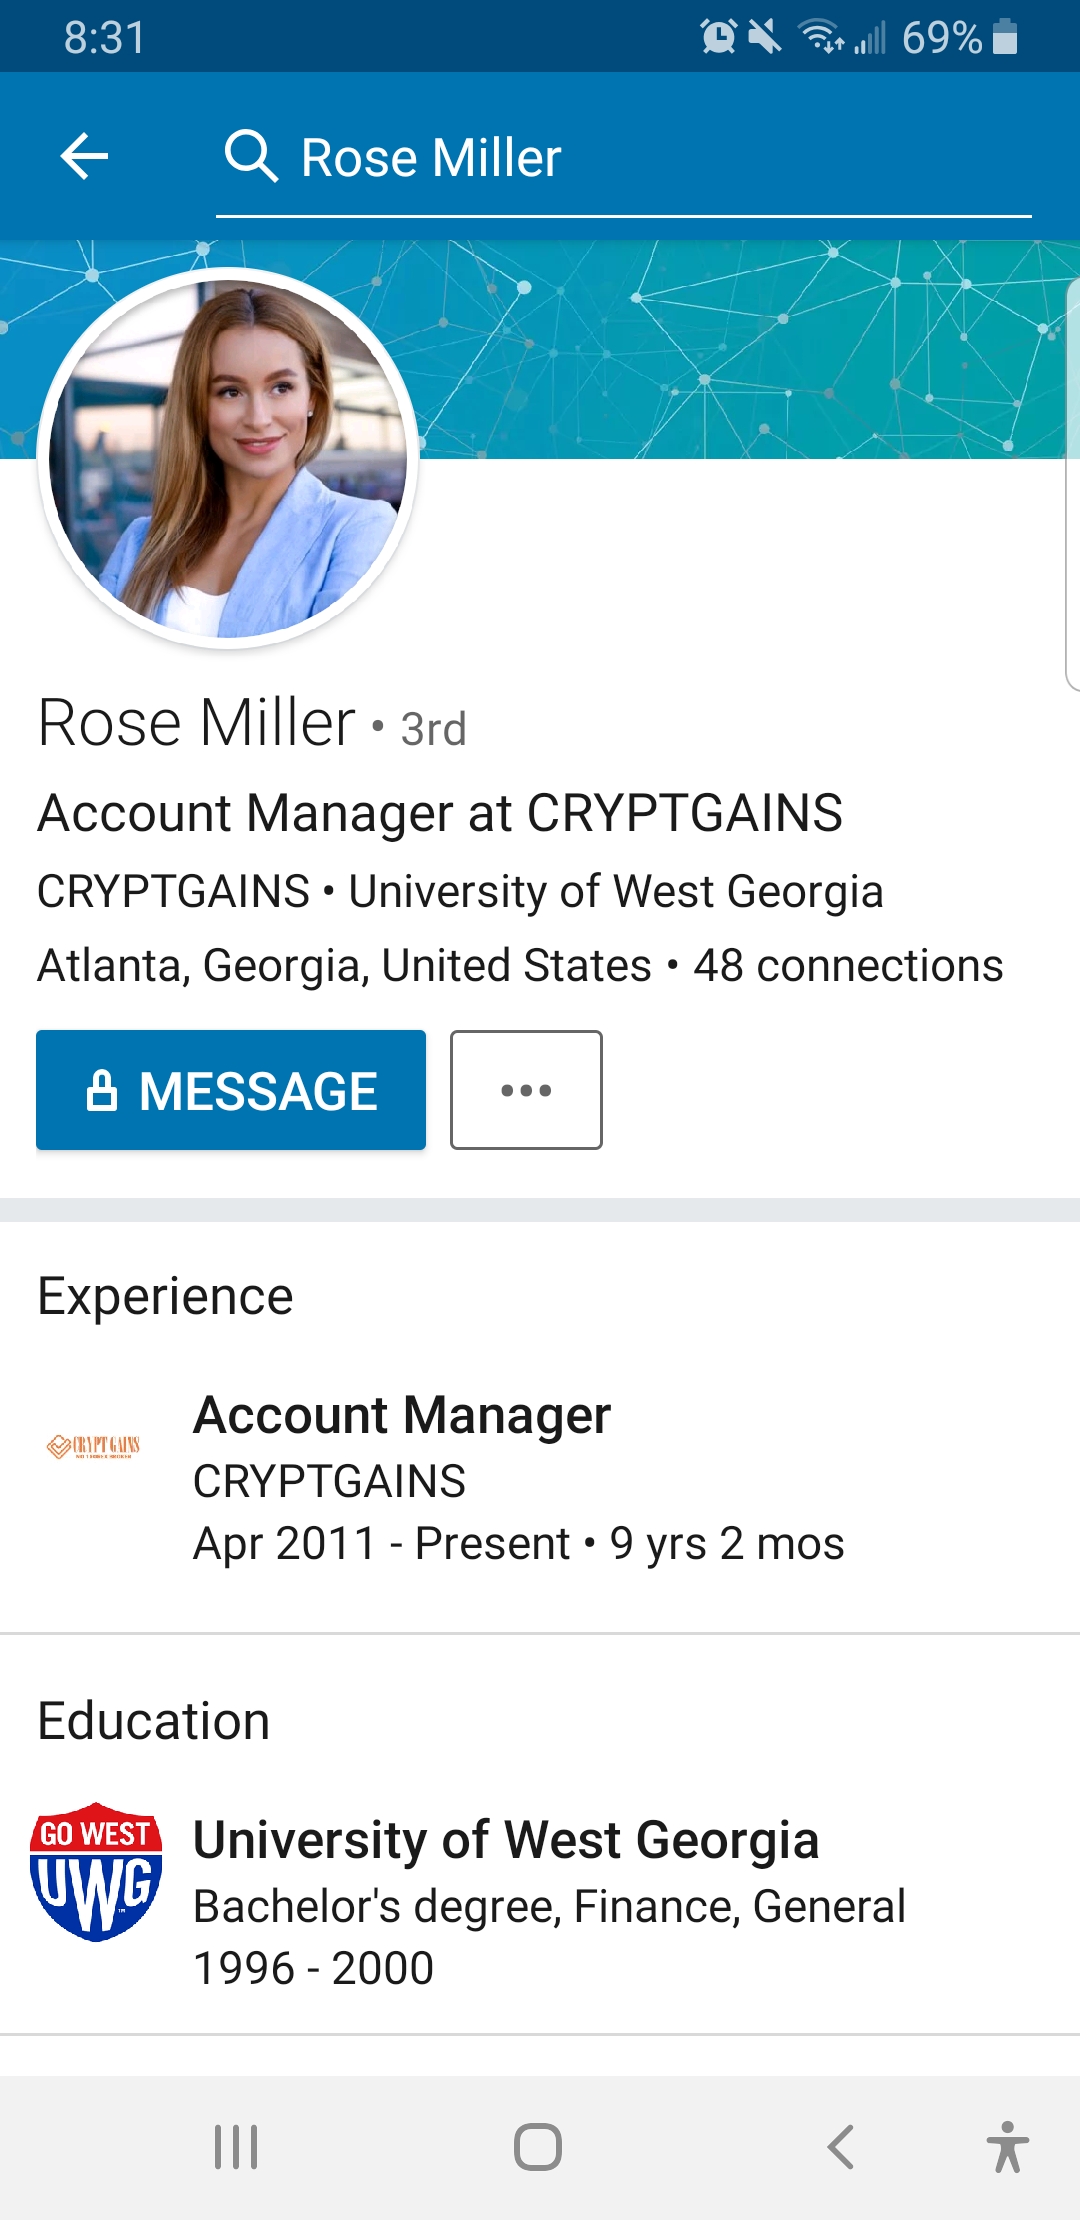 Another thief who calls herself Rose Miller